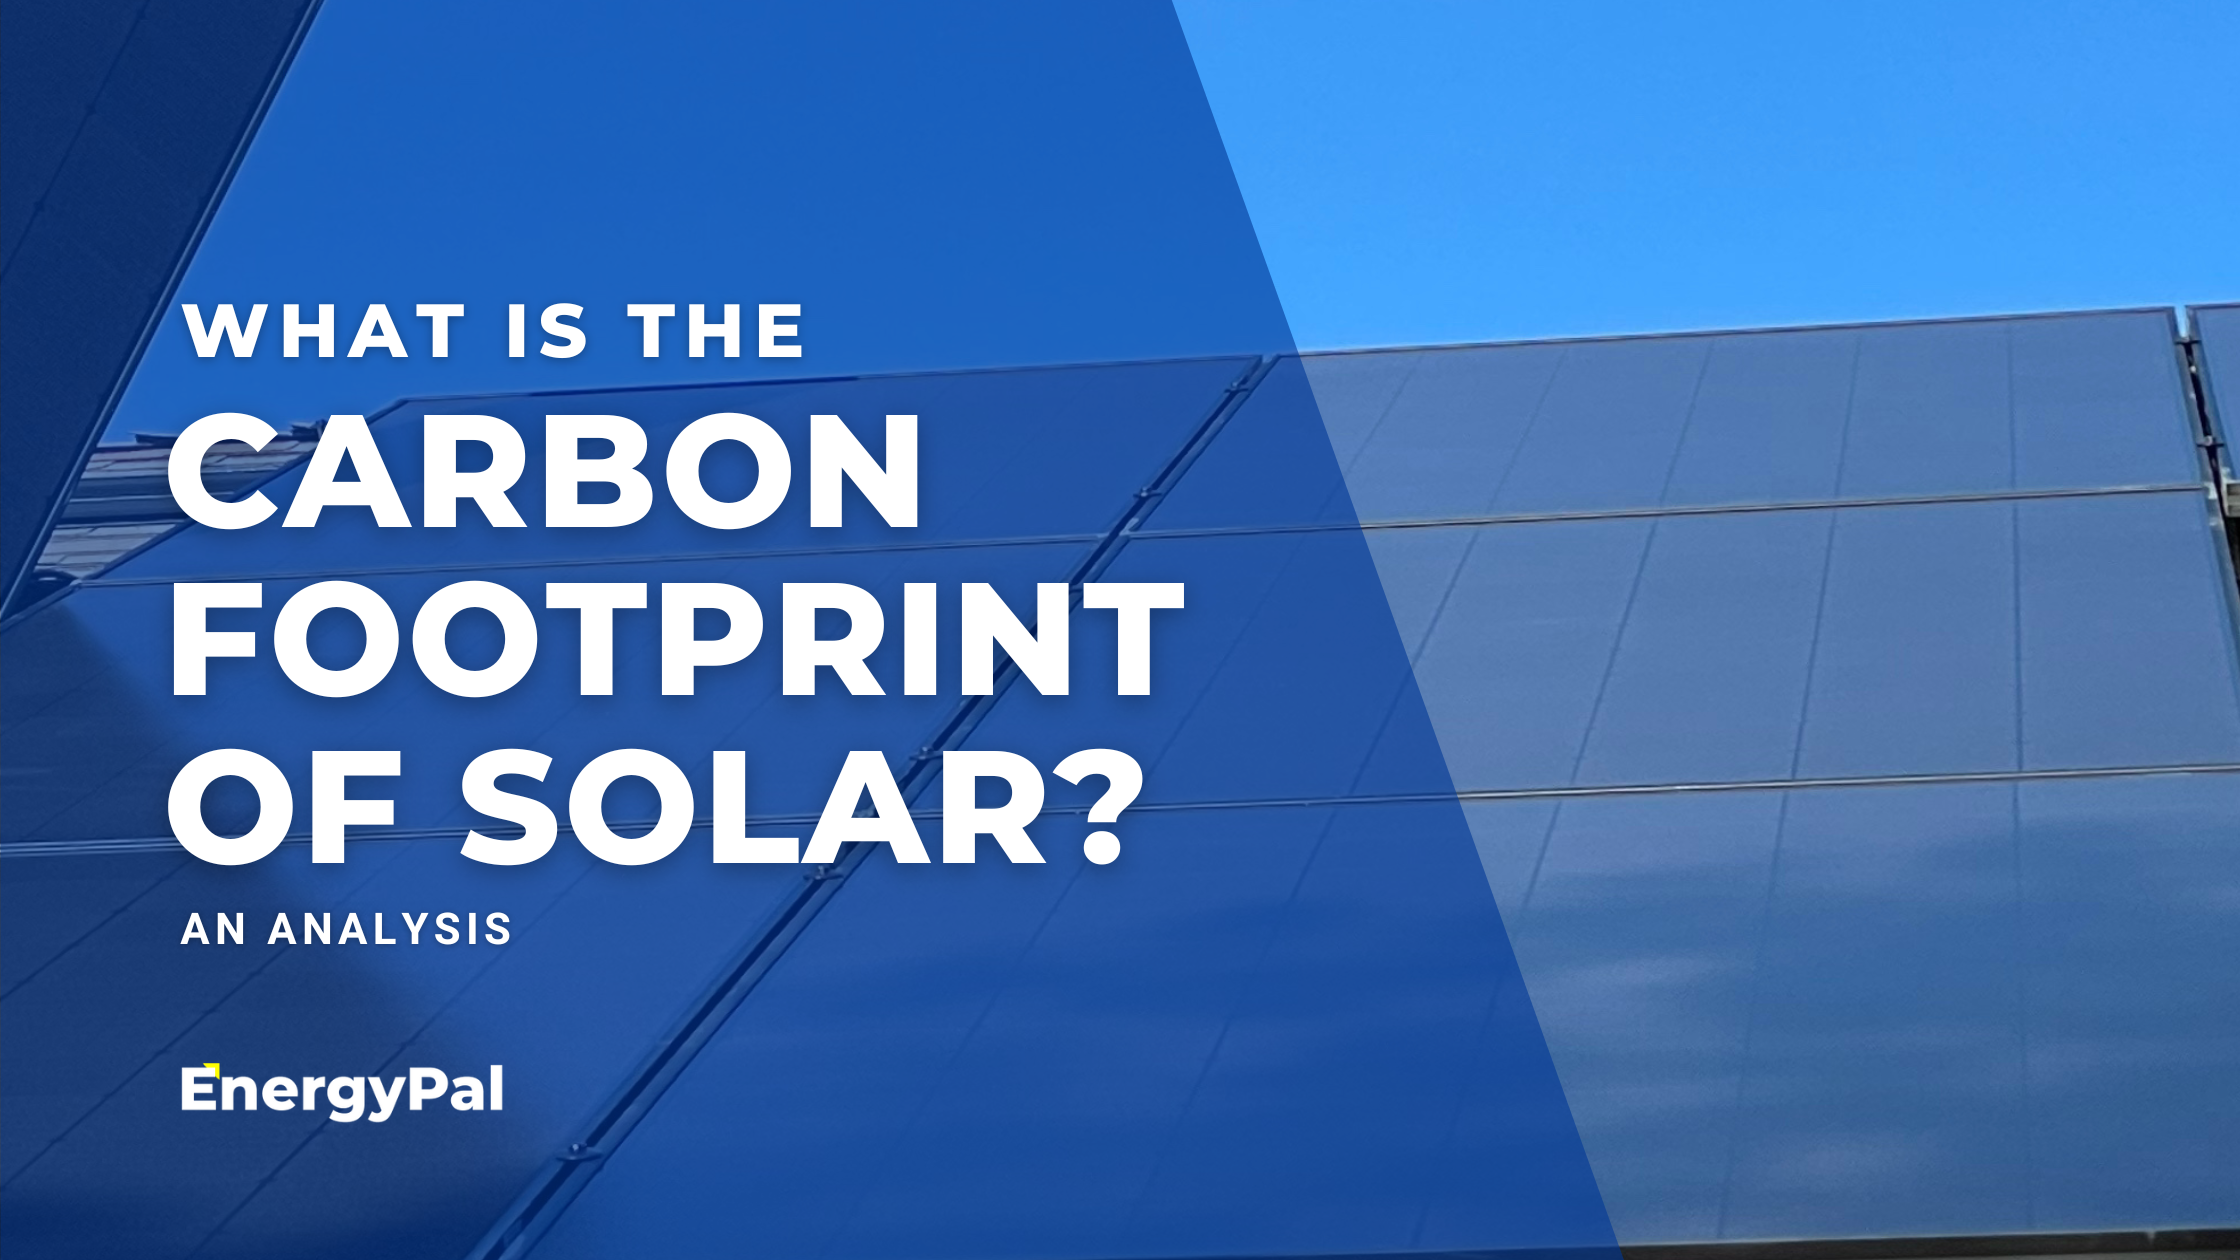 What Is The Carbon Footprint Of A Solar Panel System?